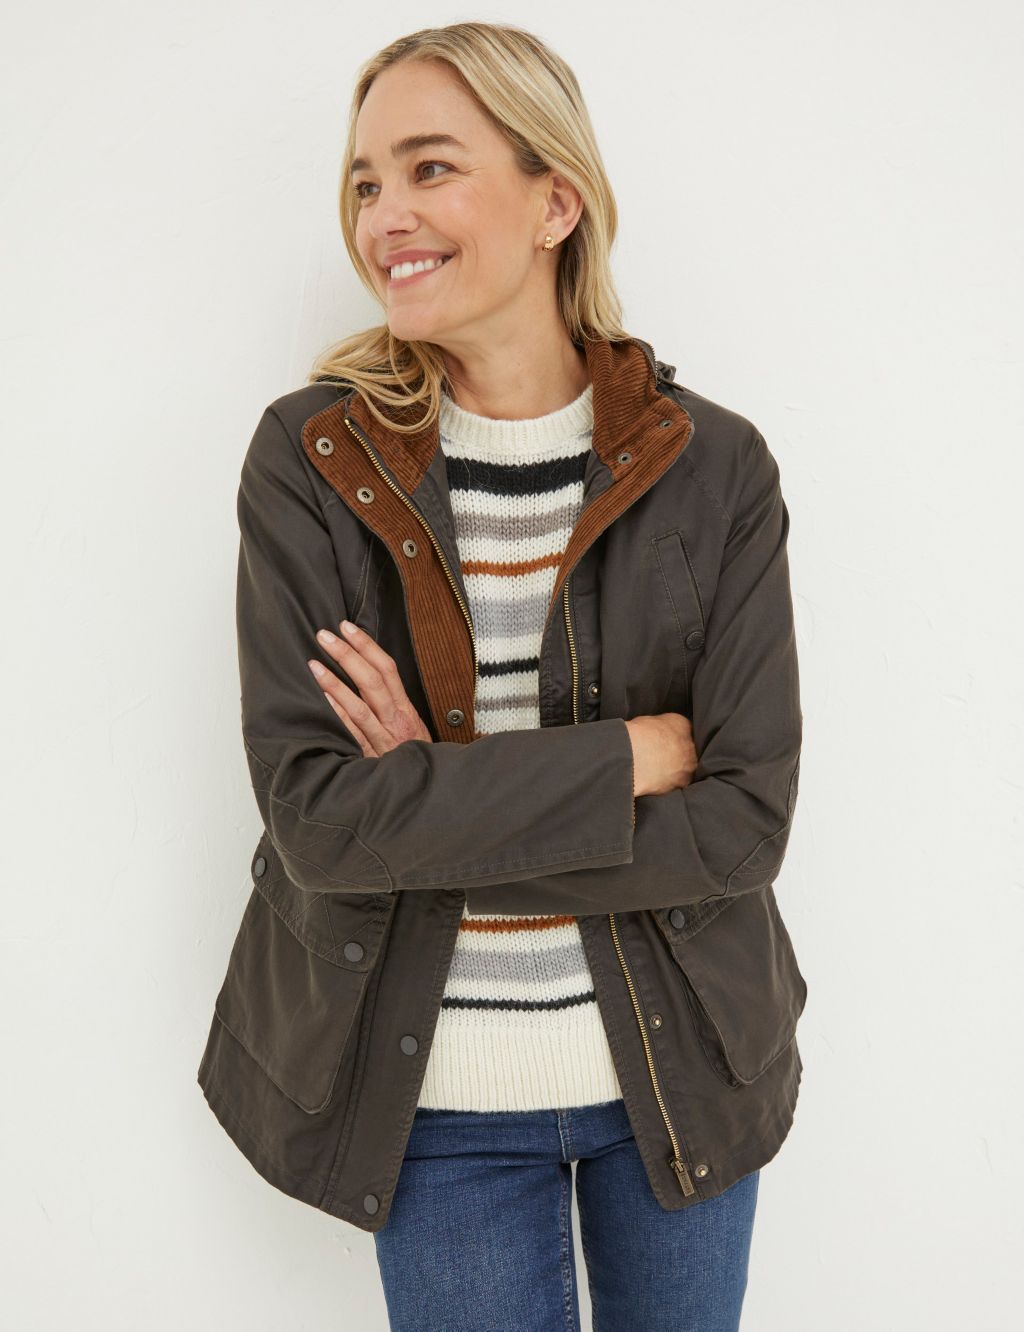 Cotton Rich Hooded Utility Jacket image 1